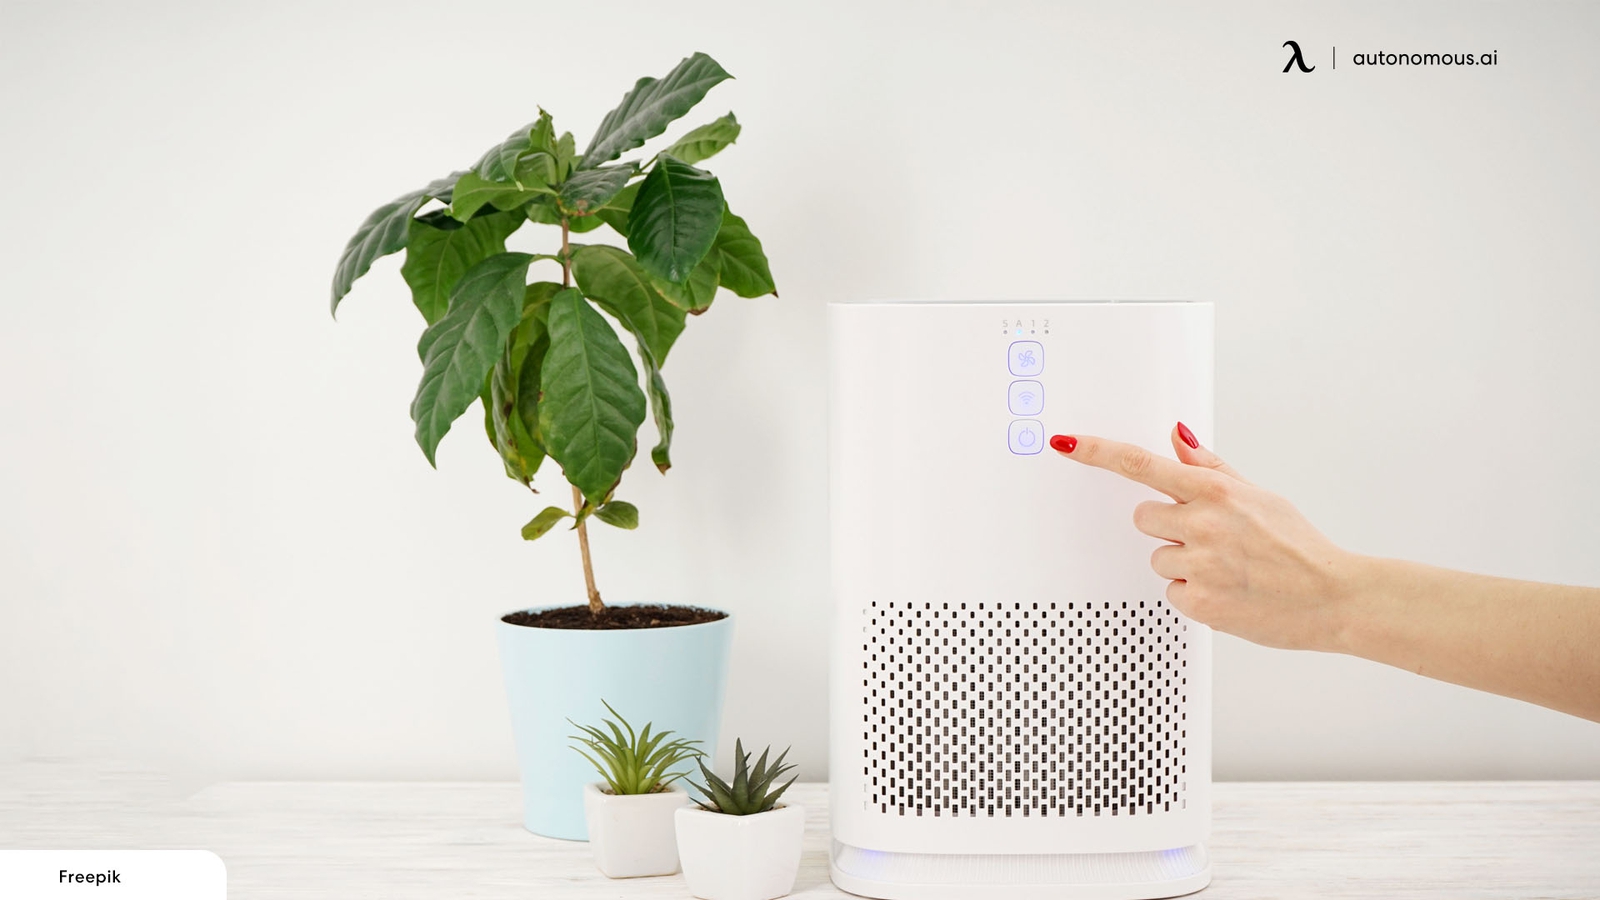 Air Purifier vs. Dehumidifier: Which One Is Suitable for You?